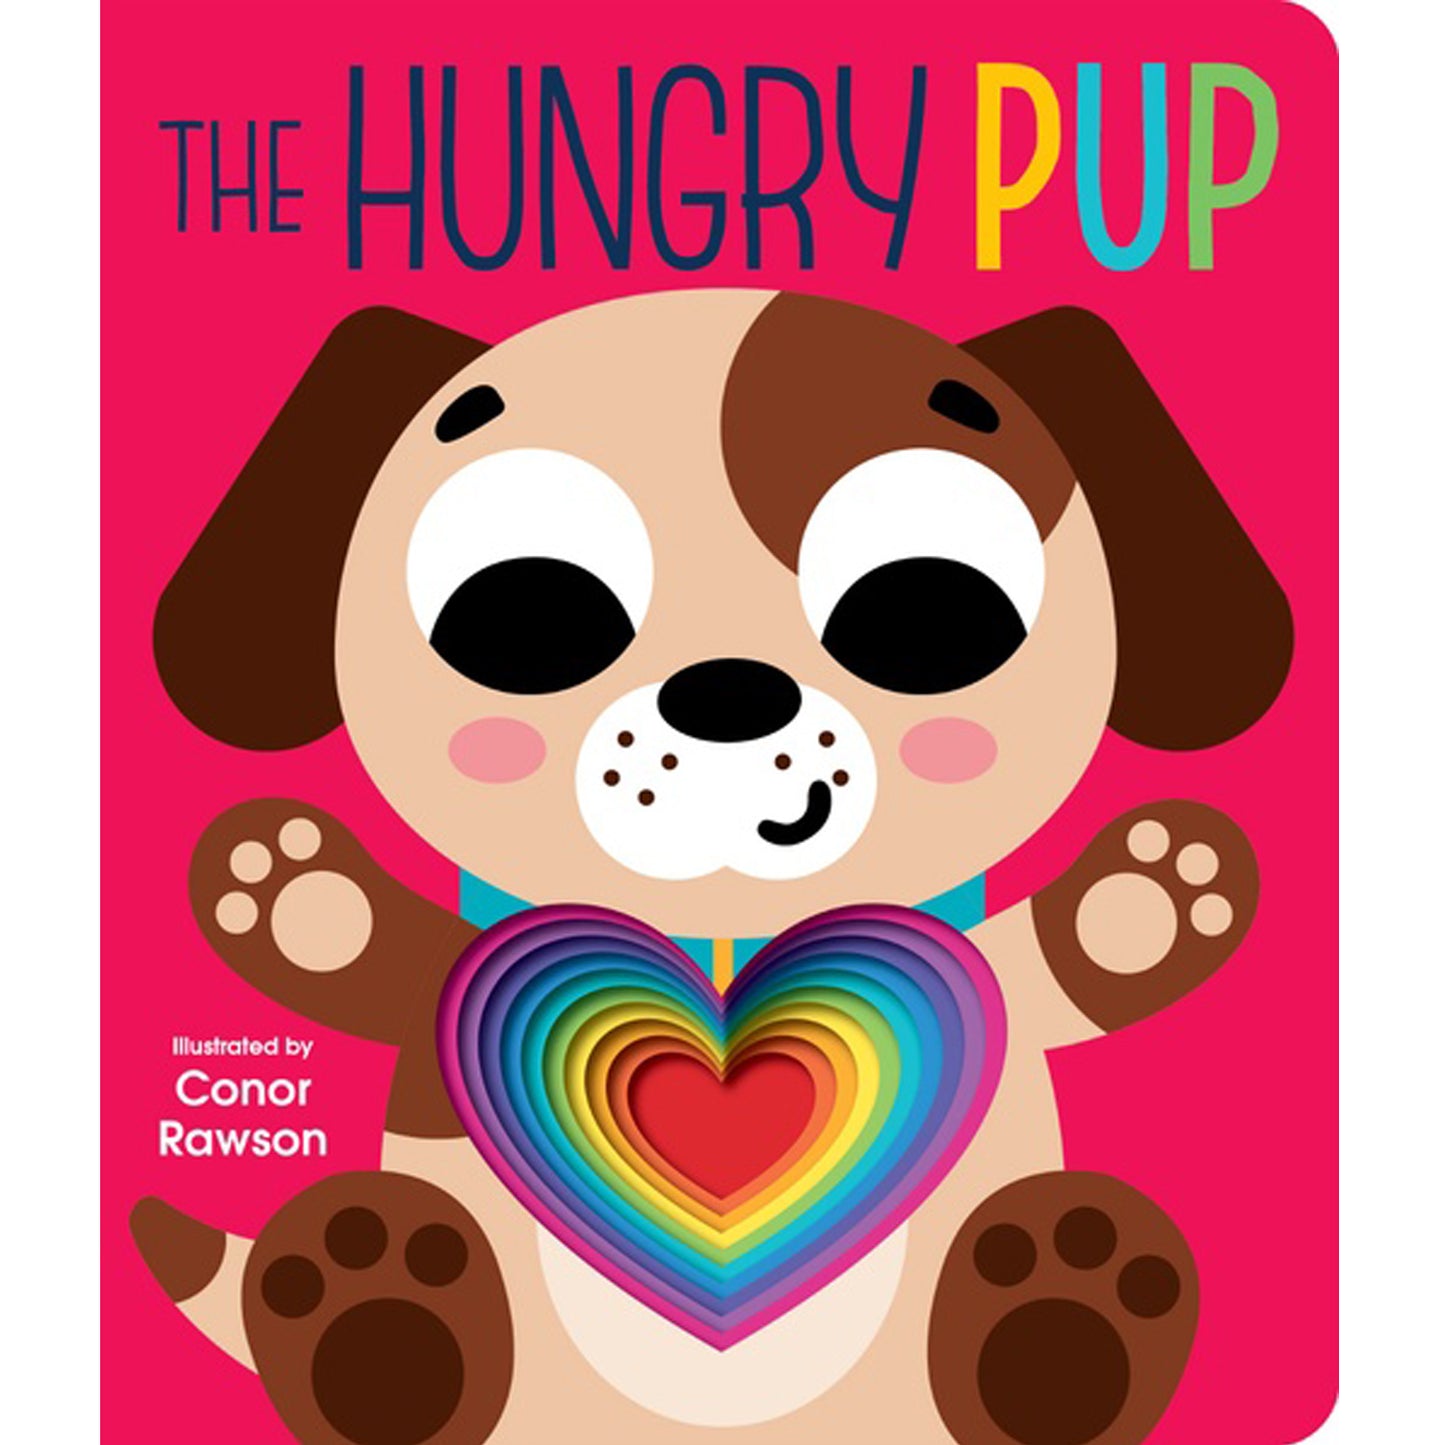 Graduating Board Book – The Hungry Pup | Children's books about digs | Early learning books | Board books |  Die cut board books